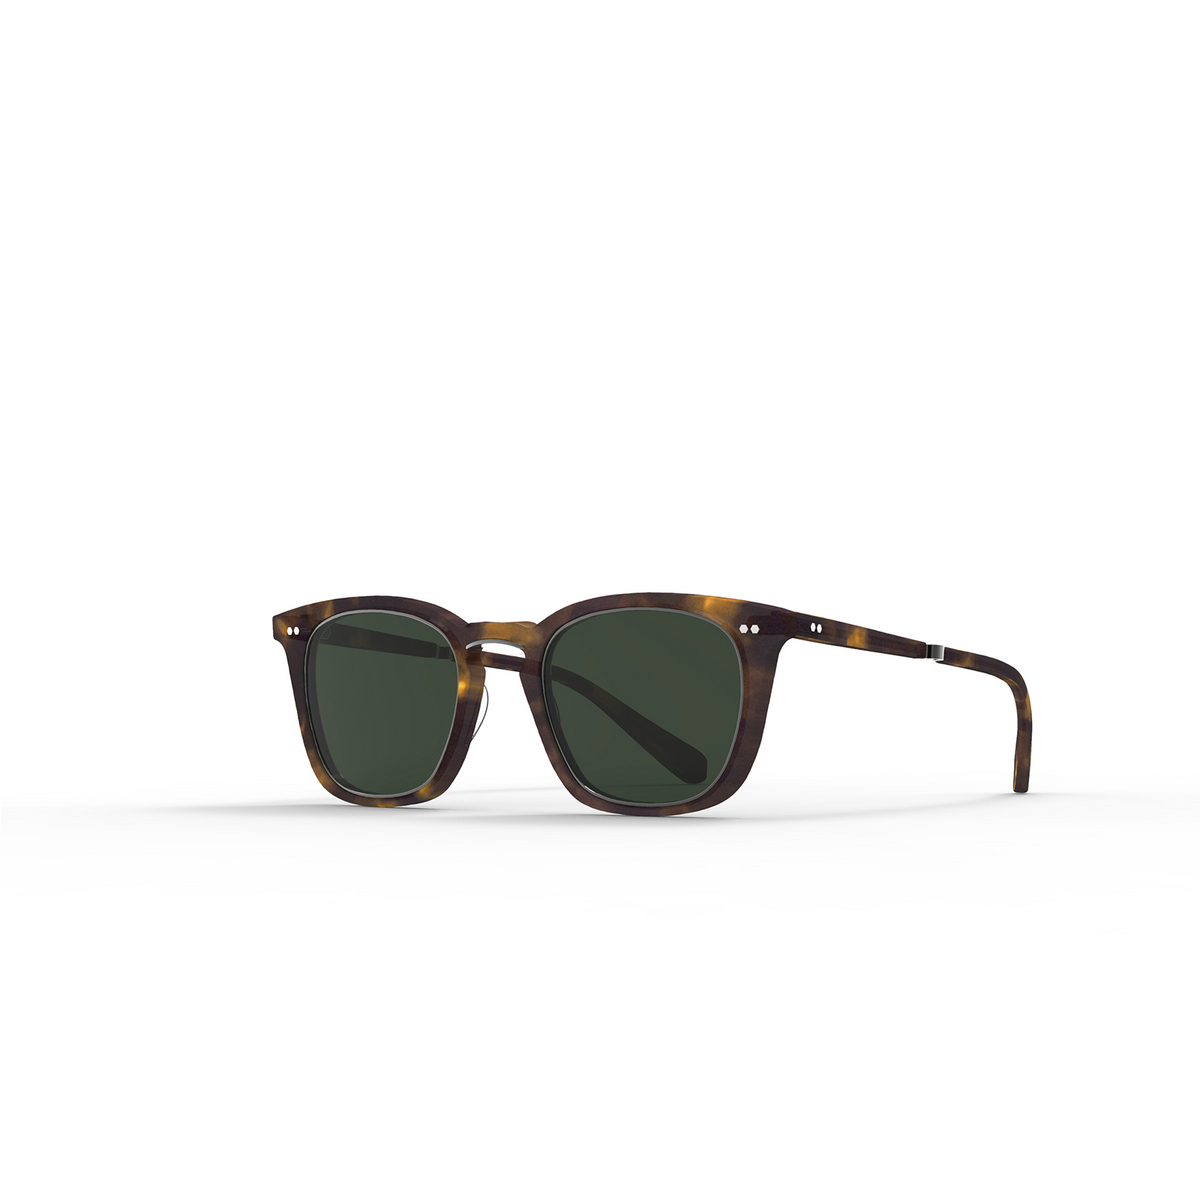 Mr. Leight GETTY II S Sunglasses CACT-PW/G15 Cacao Tortoise-Pewter - three-quarters view